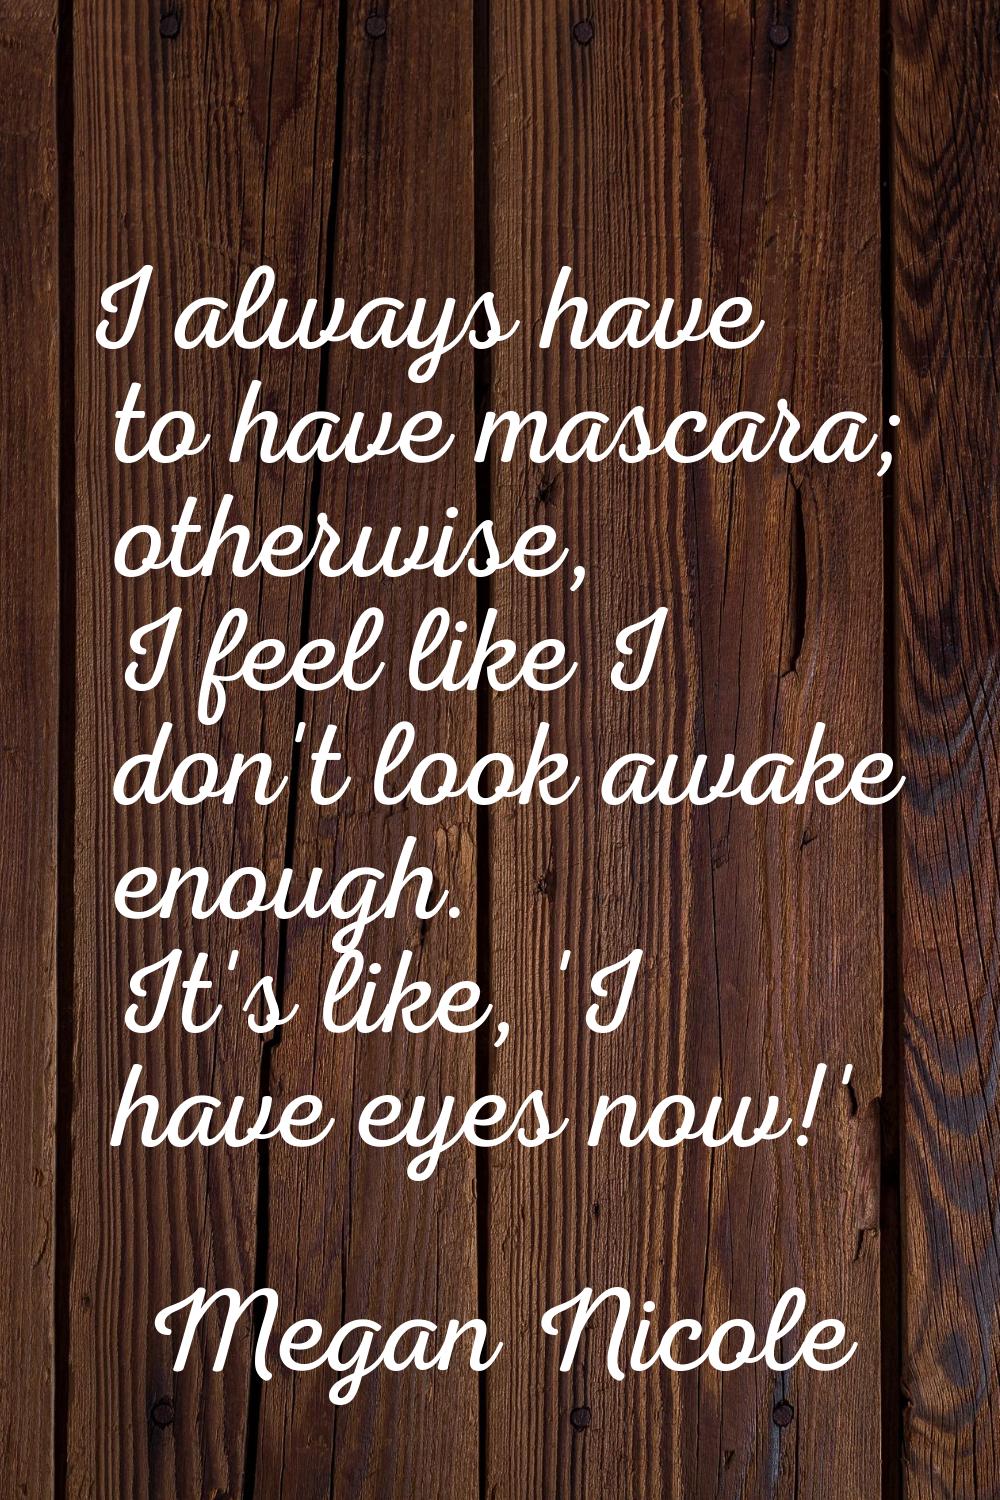 I always have to have mascara; otherwise, I feel like I don't look awake enough. It's like, 'I have